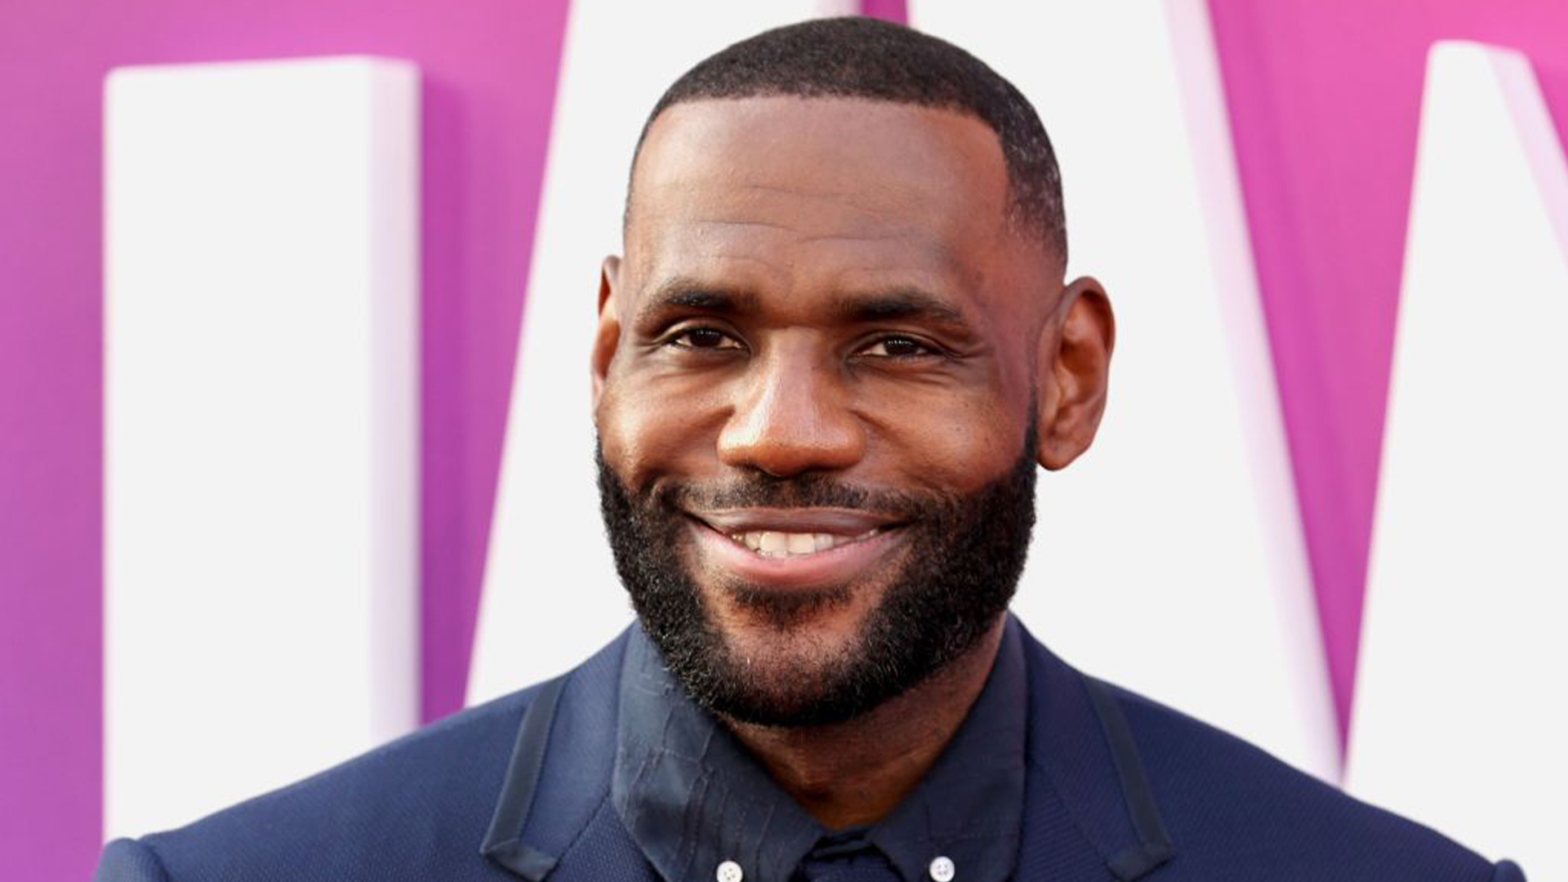 LeBron James Makes History As The First Active NBA Player To Become A Billionaire